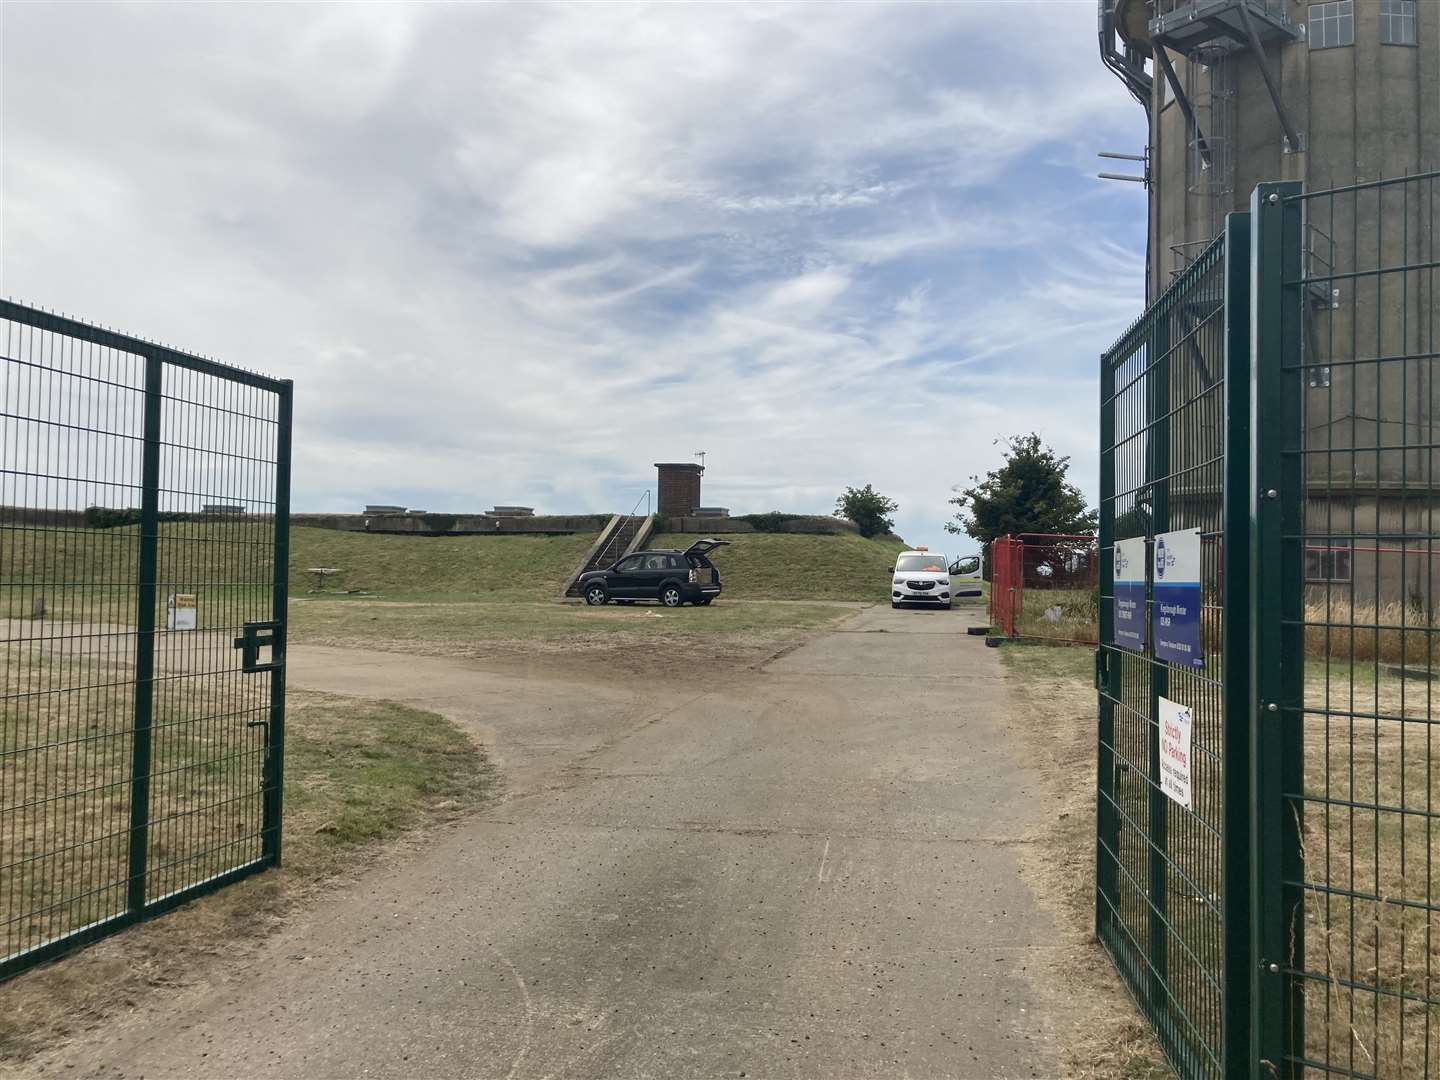 Southern Water engineers at Kingsborough Reservoir following a mains leak led to loss of pressure and supplies cut off to homes on the Isle of Sheppey